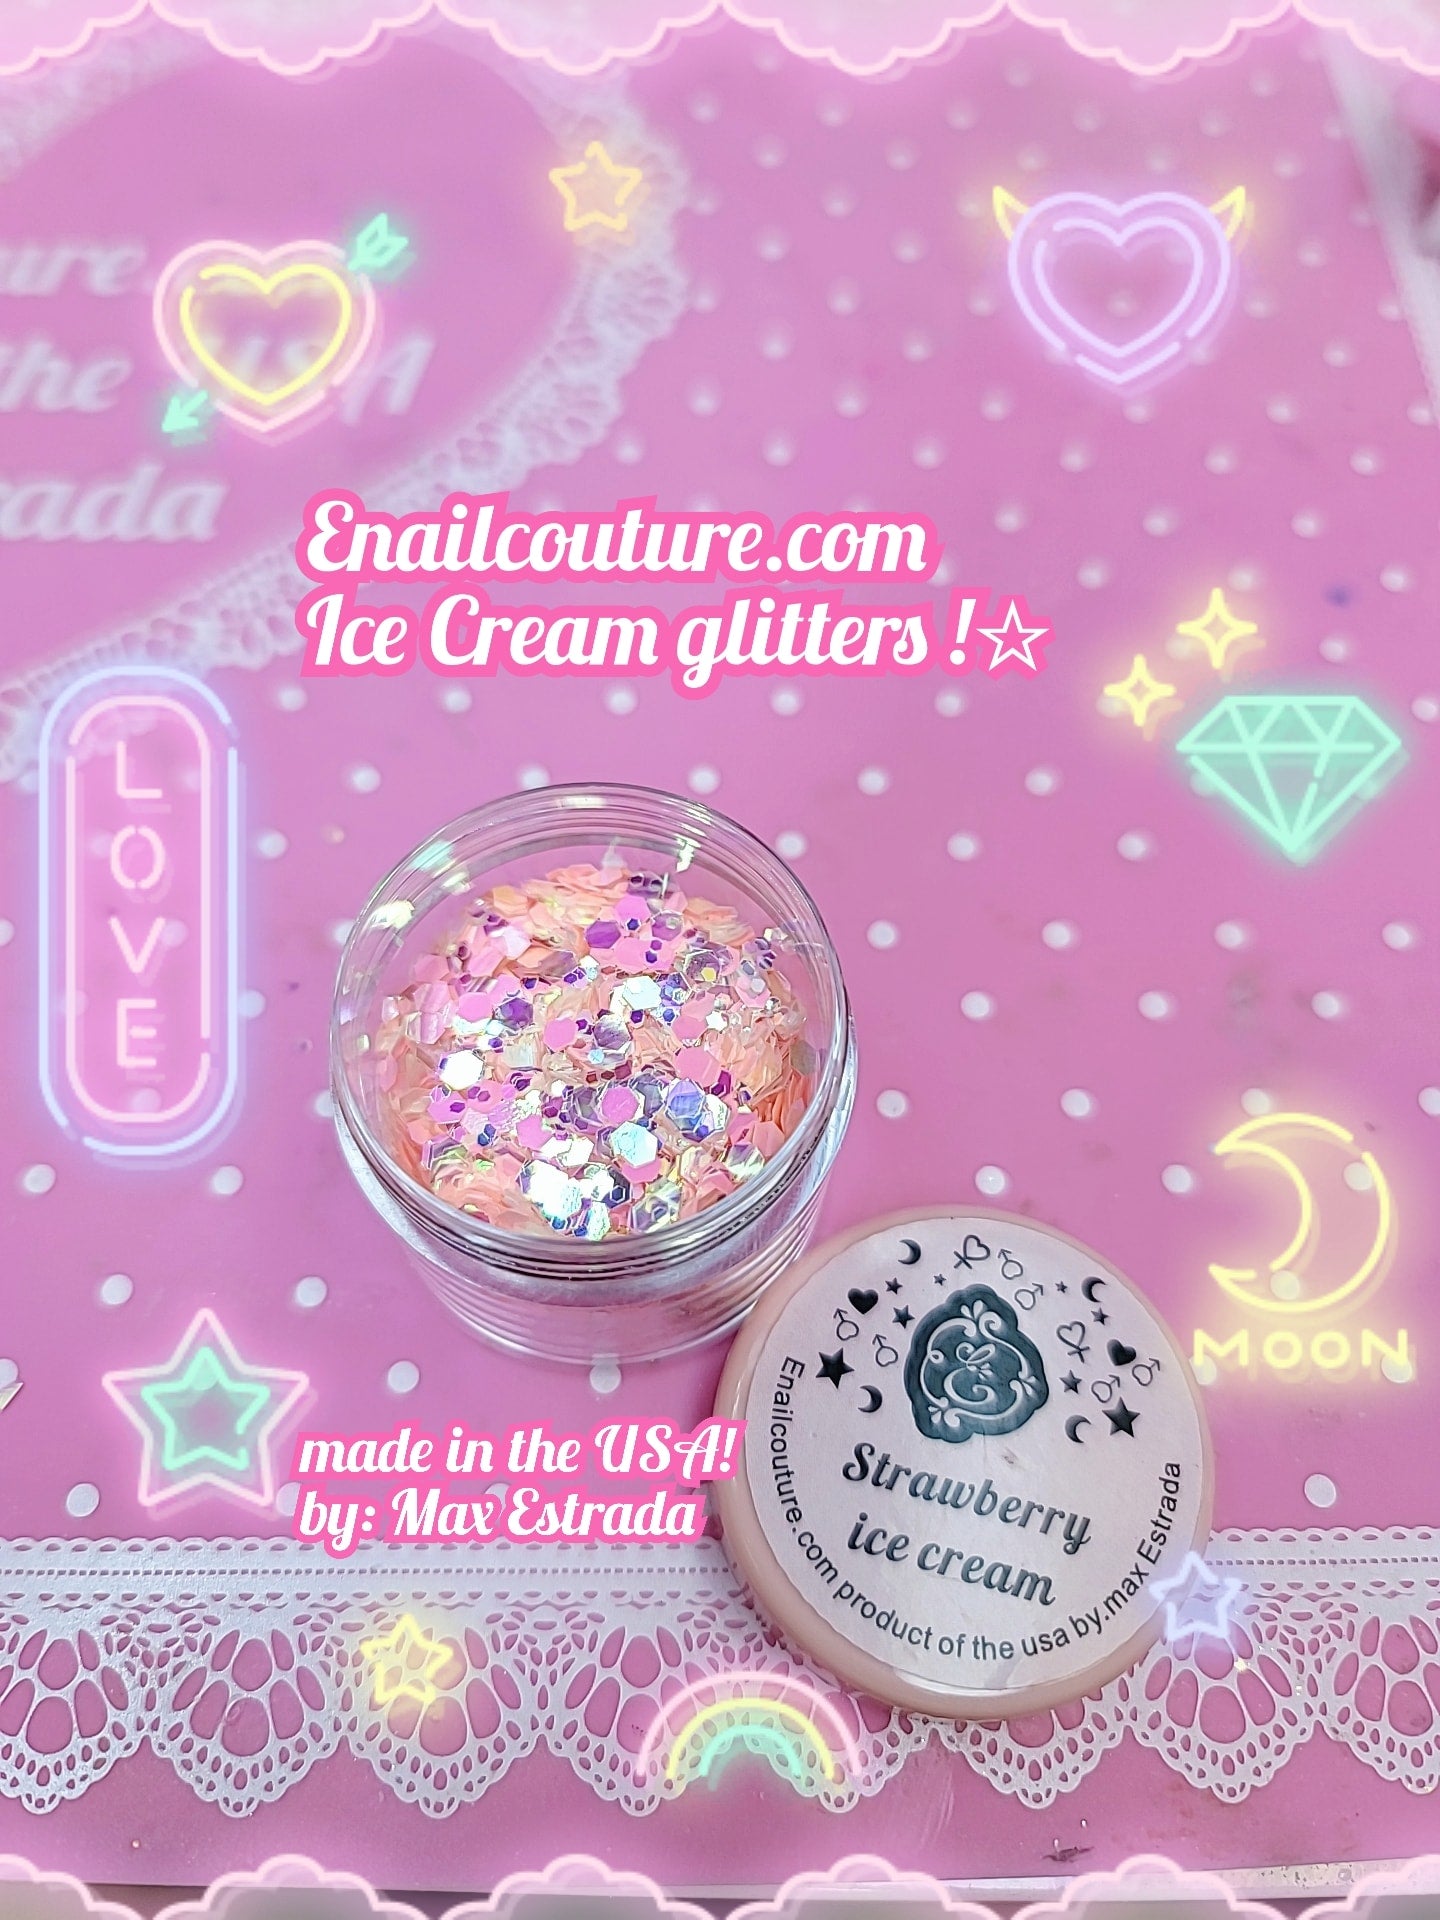 Ice Cream Glitter Series (Holographic Nail Art Glitters Shinning Sugar Effect Nail Powders Laser Candy Color Nail Art Supplies Flakes Dipping Dust Colorful Nail Decor Glitter Sequins Designs Manicure Tips Accessories )